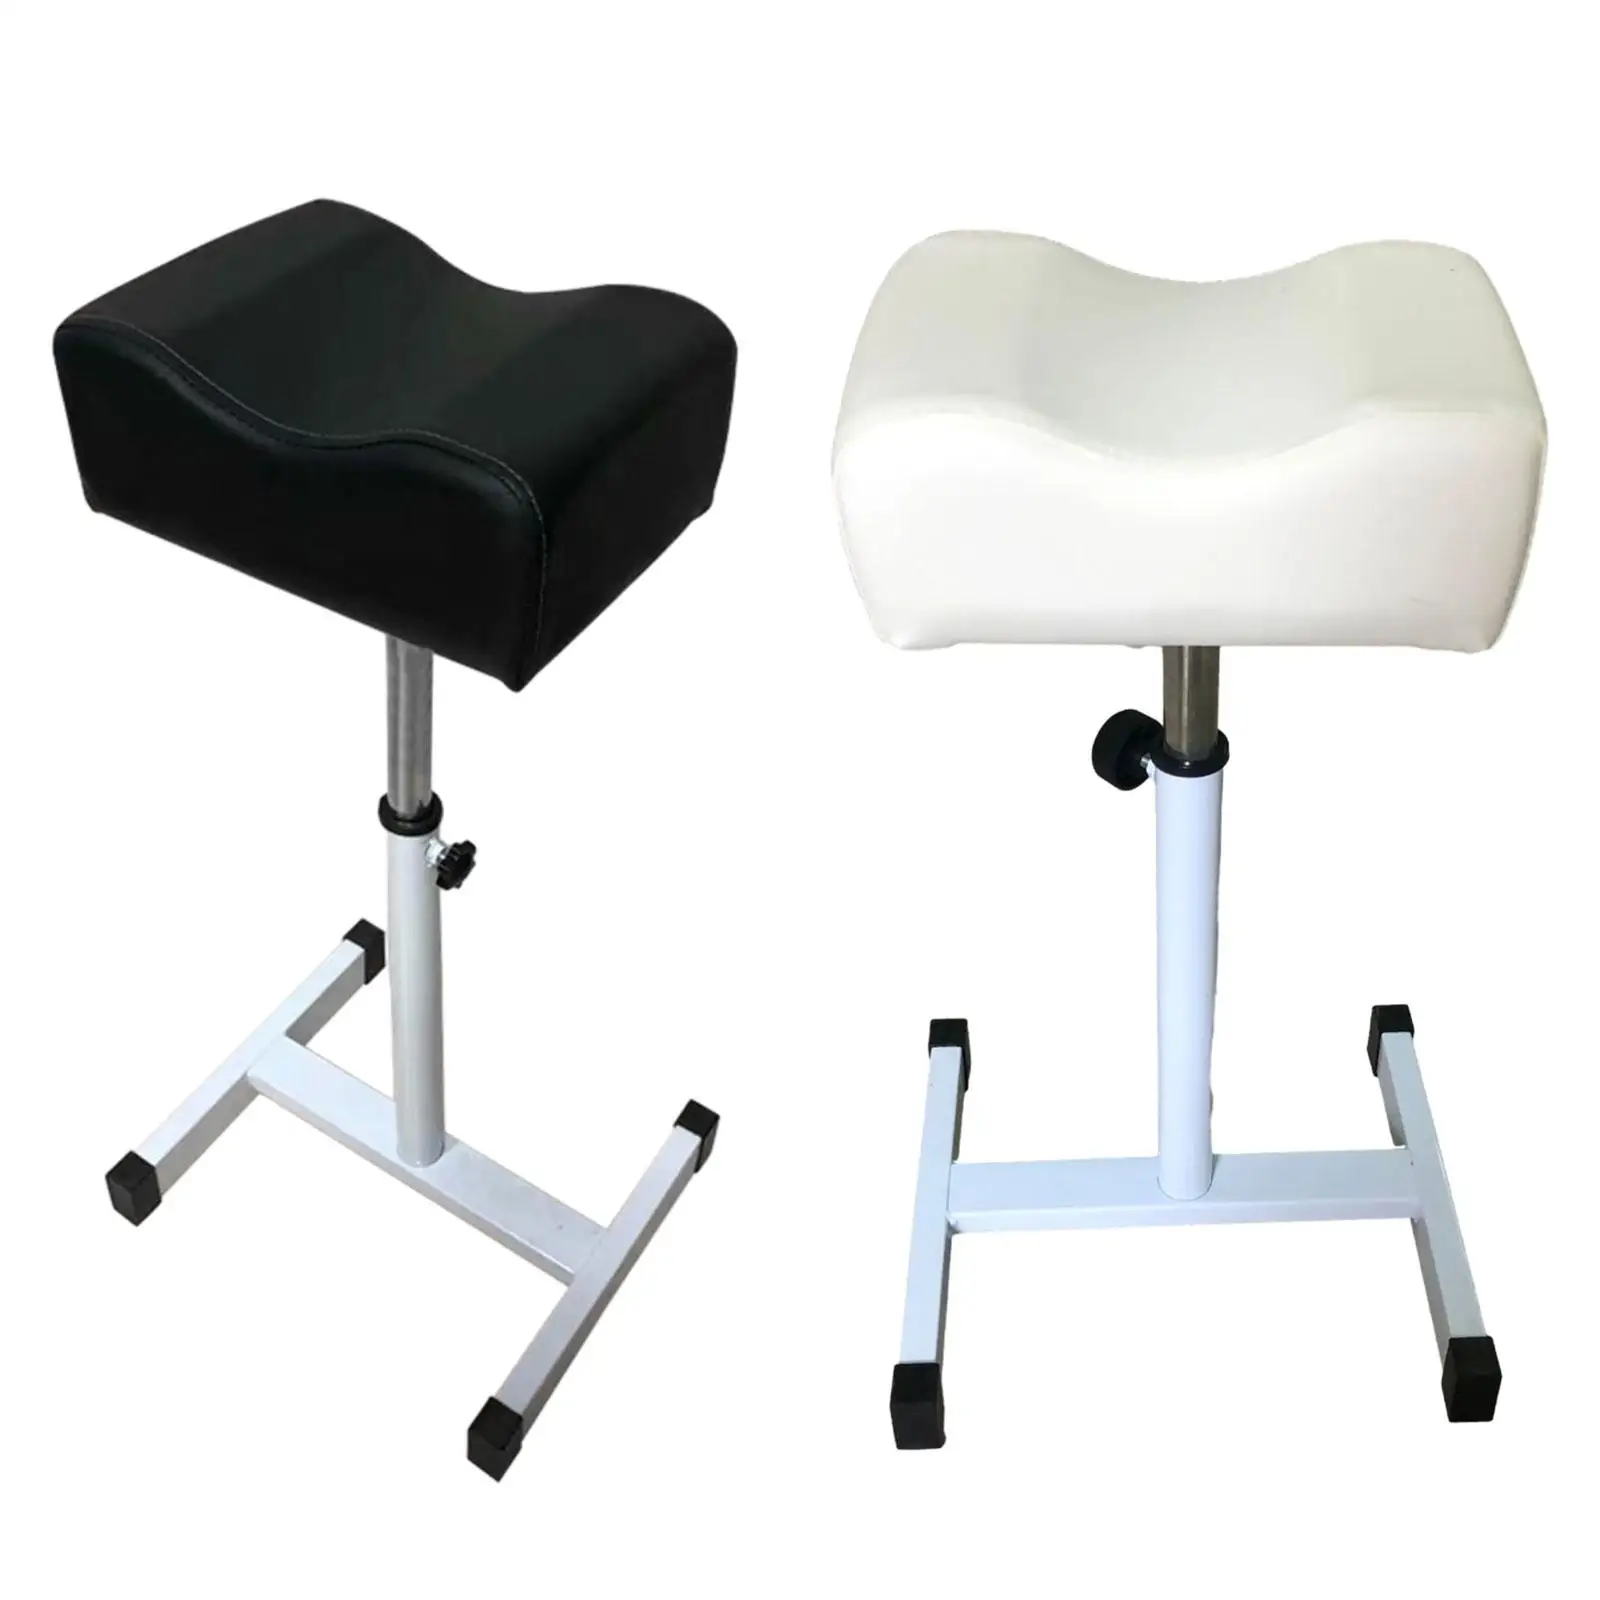 Pedicure Manicure Footrest Adjustable 49cm-69cm Anti Skid Foot Nail Beauty Stool Stand Foot Massage for SPA